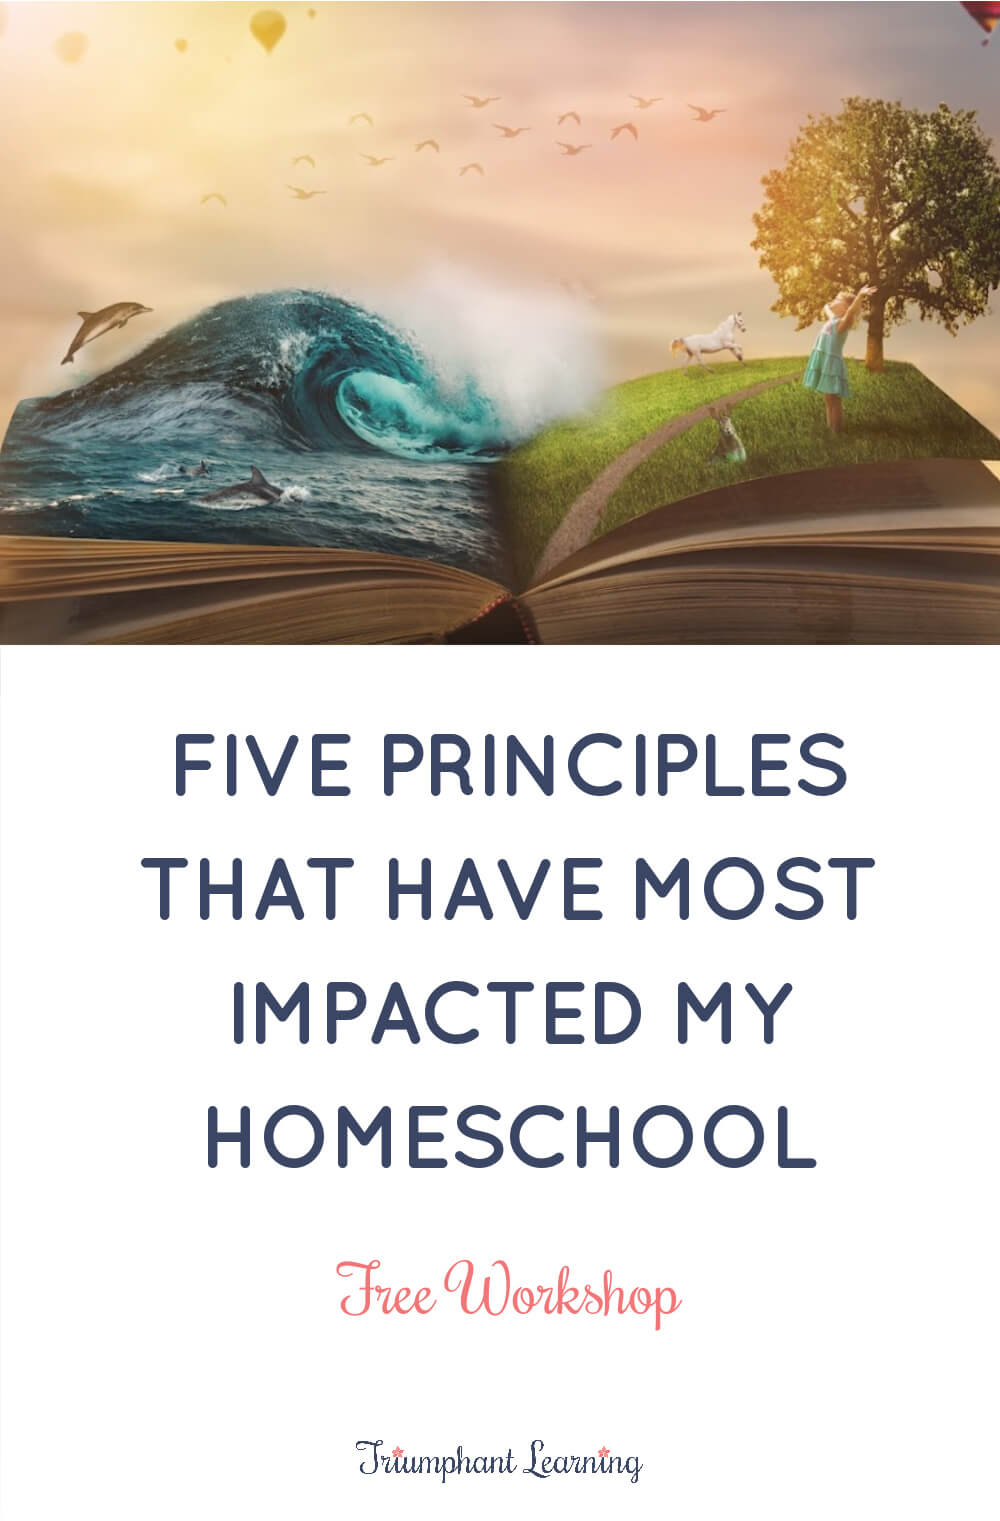 These five principles have had a profound impact on our homeschool. Learn how they can help you can breathe life into your homeschool. via @TriLearning